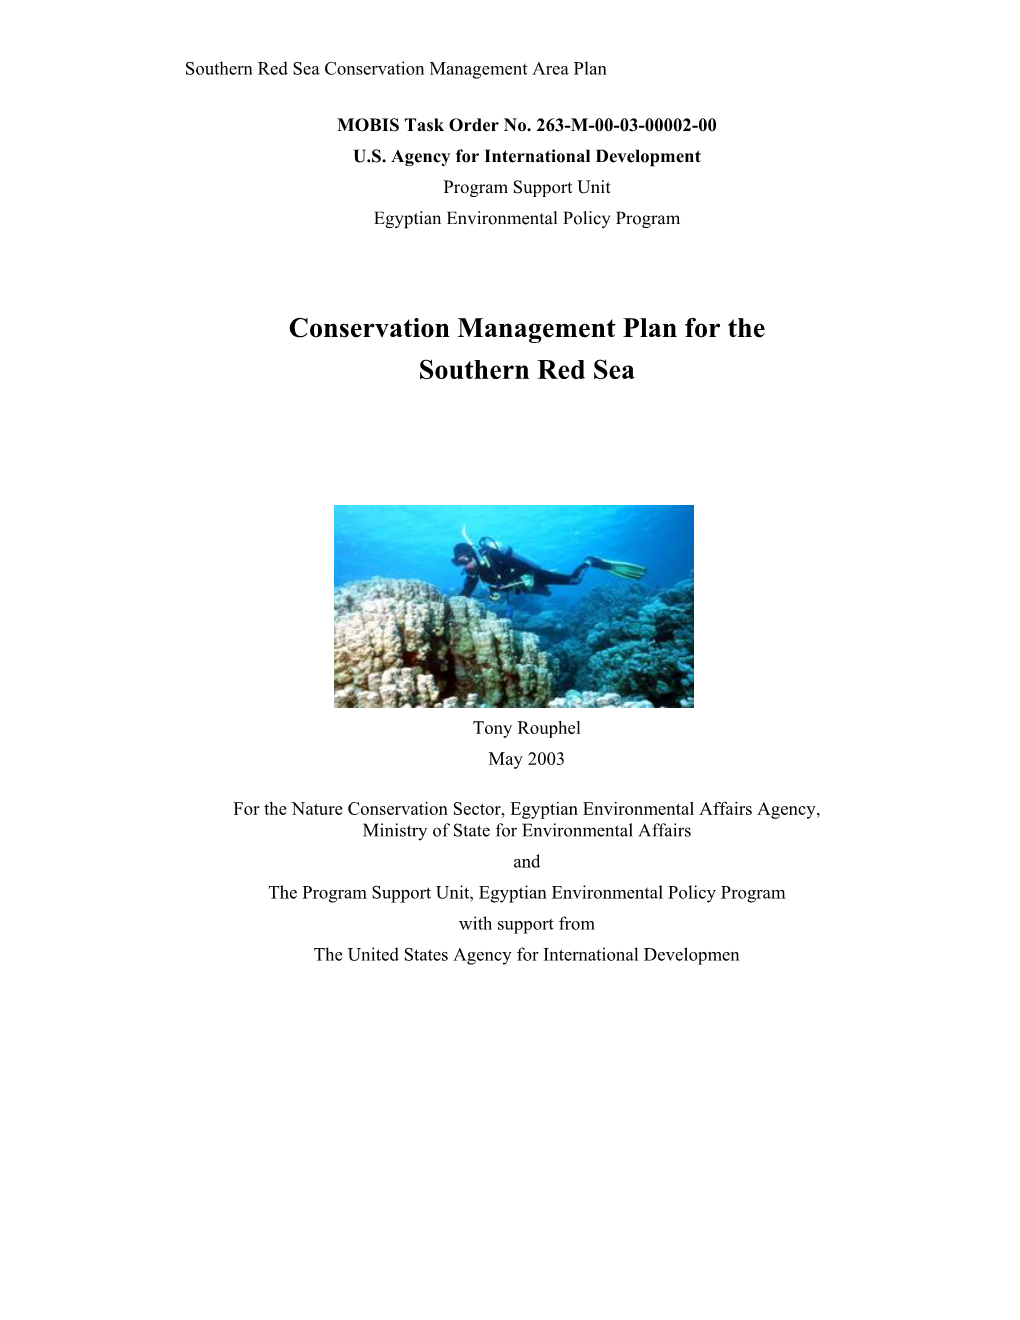 Conservation Management Plan for the Southern Red Sea